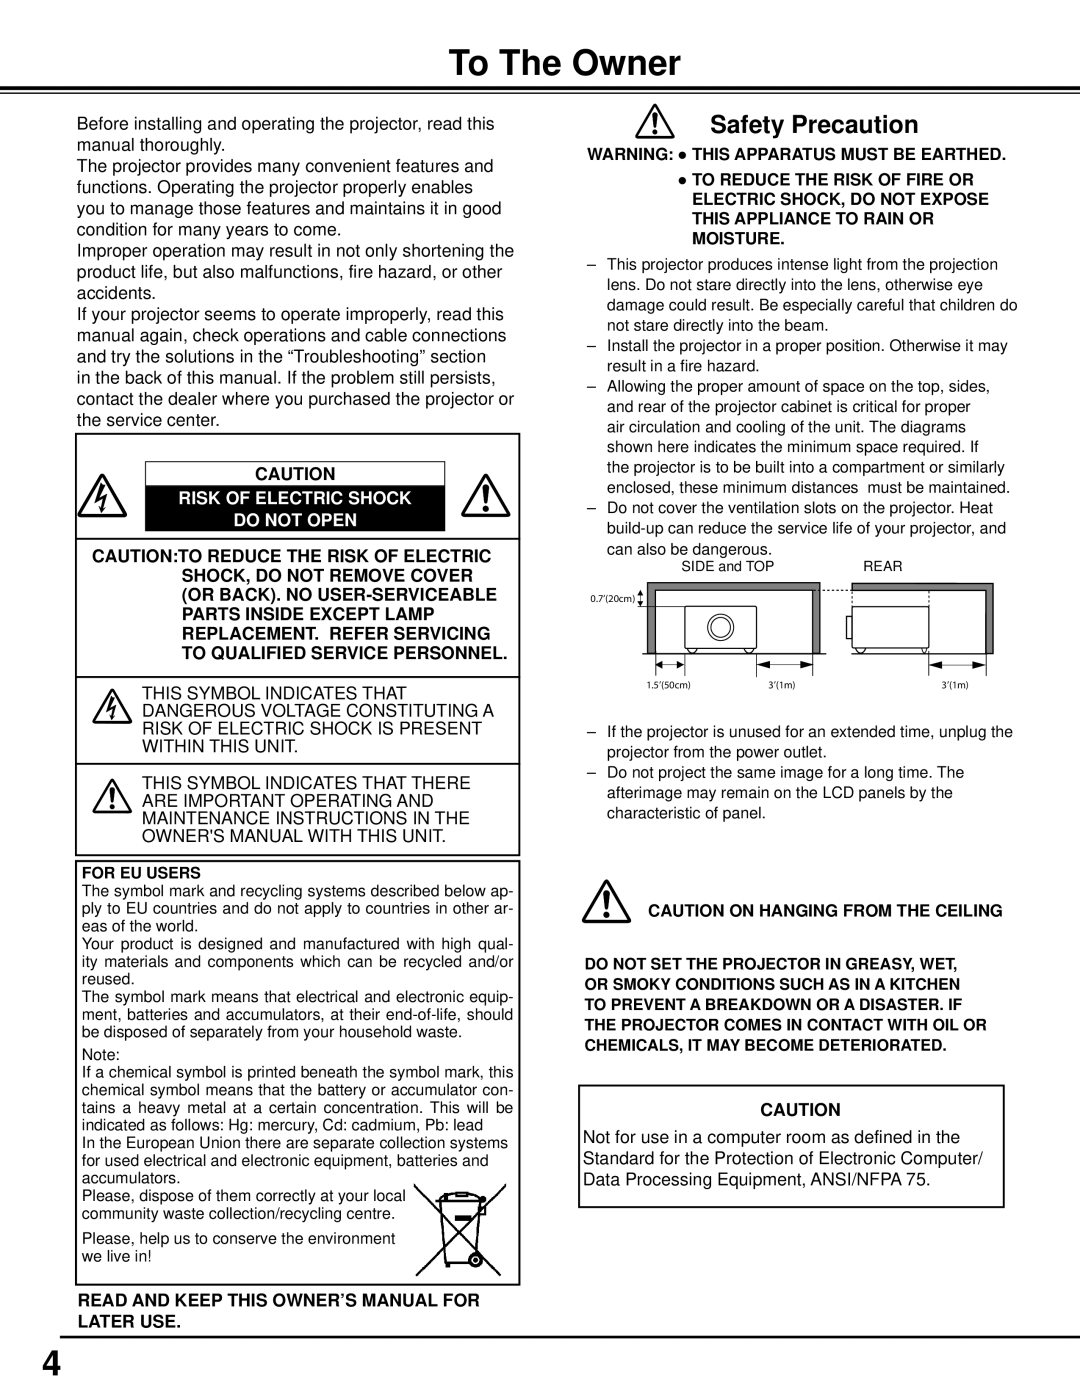 Sanyo WM5500L, PLC-WM5500 owner manual To The Owner, Safety Precaution, Risk Of Electric Shock Do Not Open 